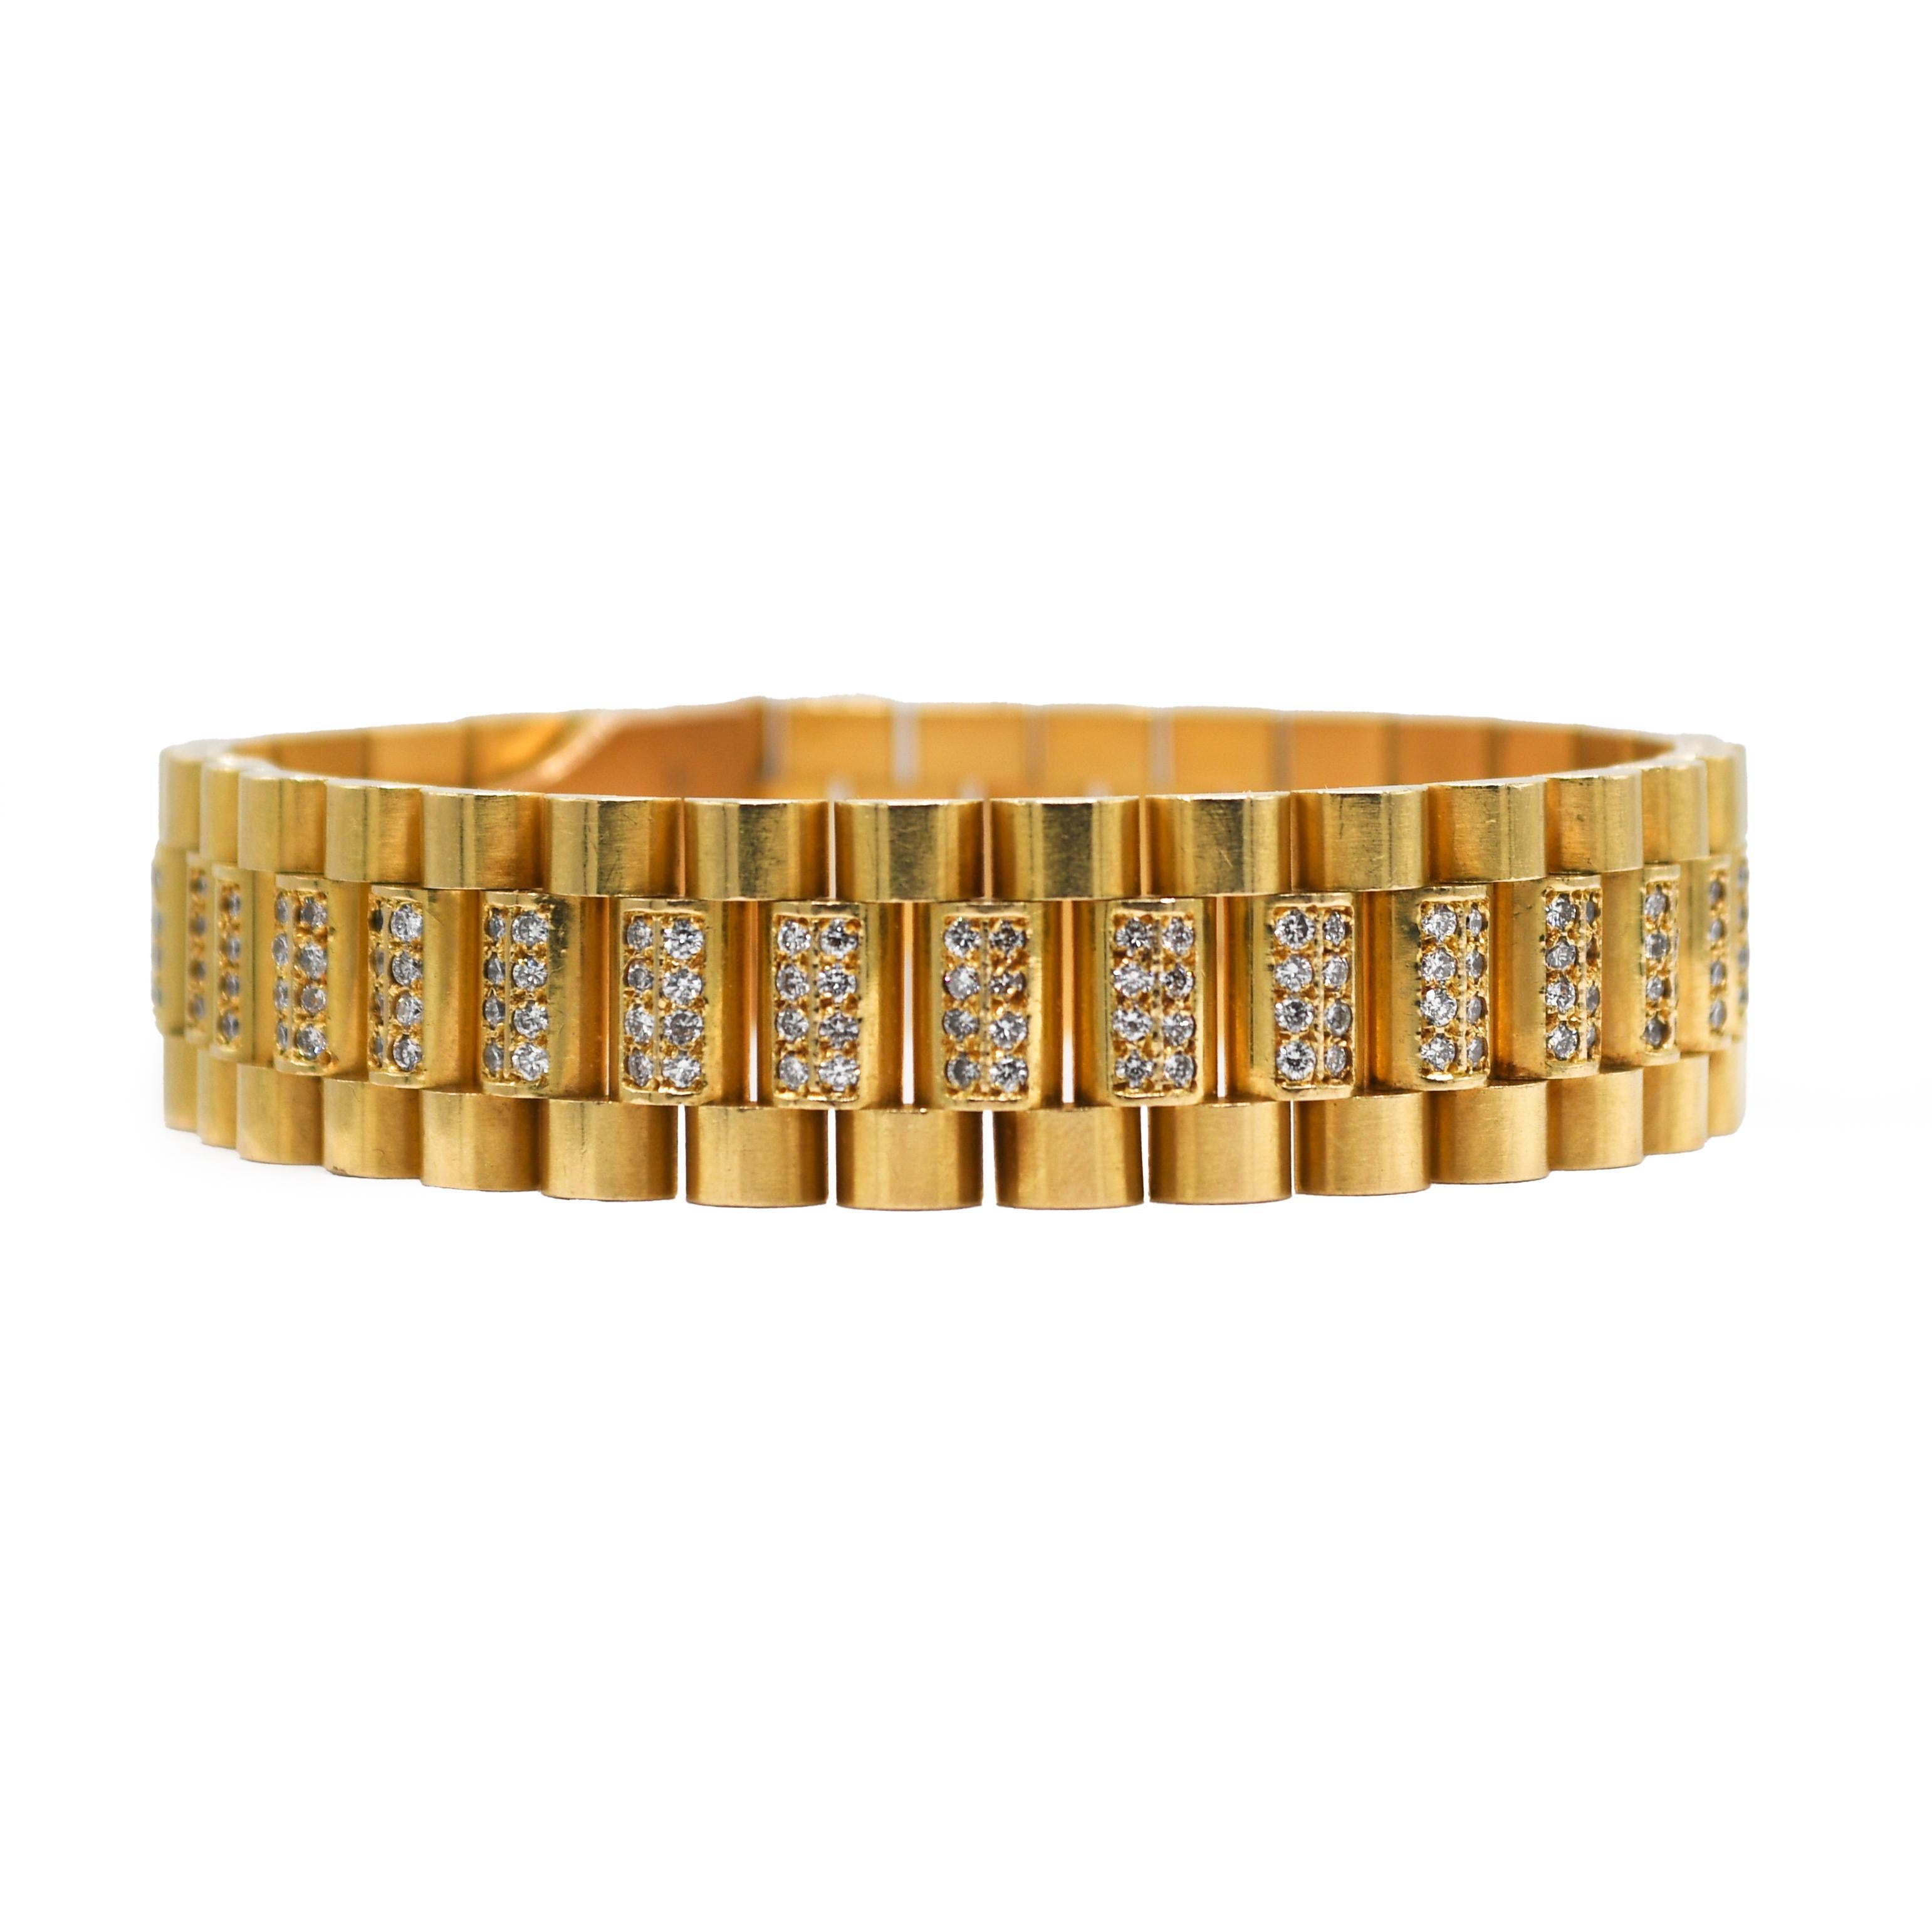 Men's Rolex style 18k yellow gold and diamond bracelet. 
Stamped 18k and weighs 86.5 grams.
The bracelet is made to look like the Rolex president watch bracelet including the clasp.
The diamonds are round brilliant cuts, G, H, i color range, Vs